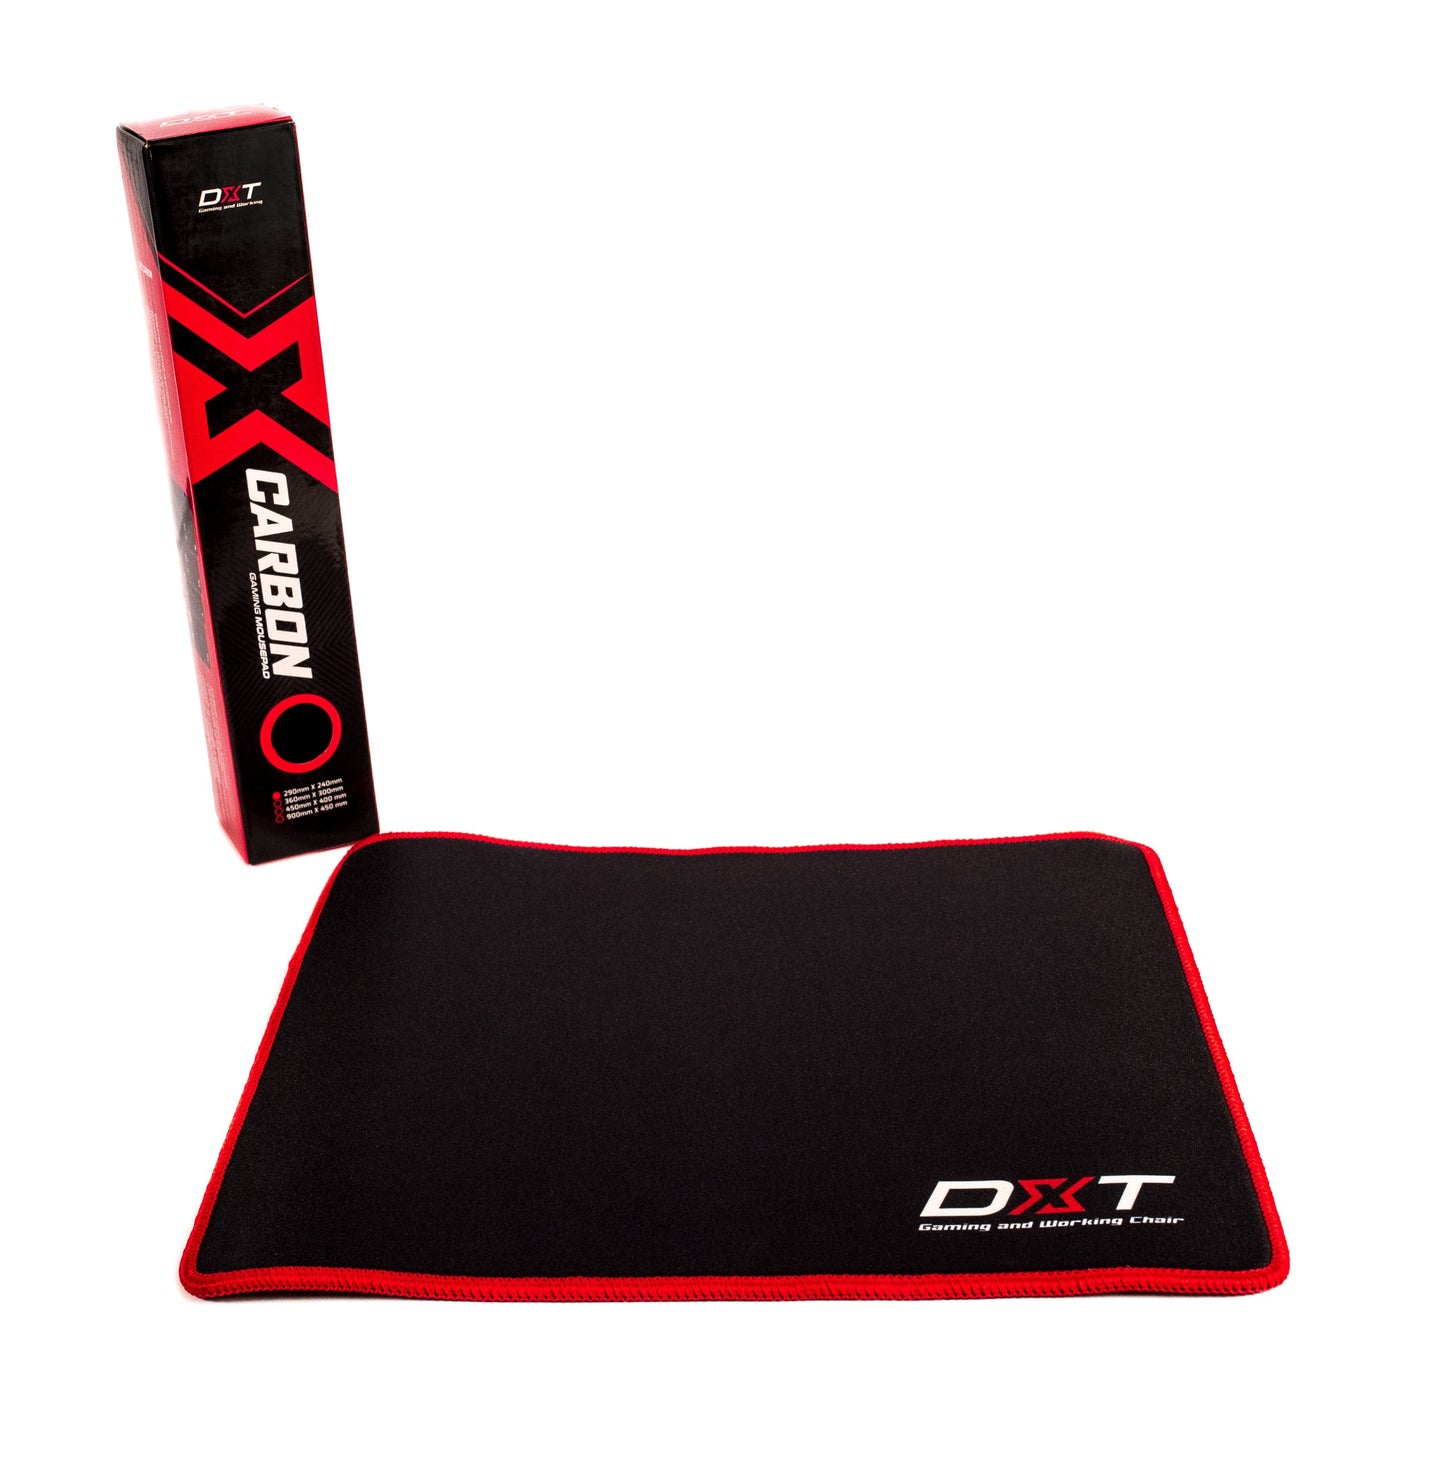 Accesorio - PC Gaming - Mouse Pad Carbon Negro/Rojo 290x240x4 mm S - DXT